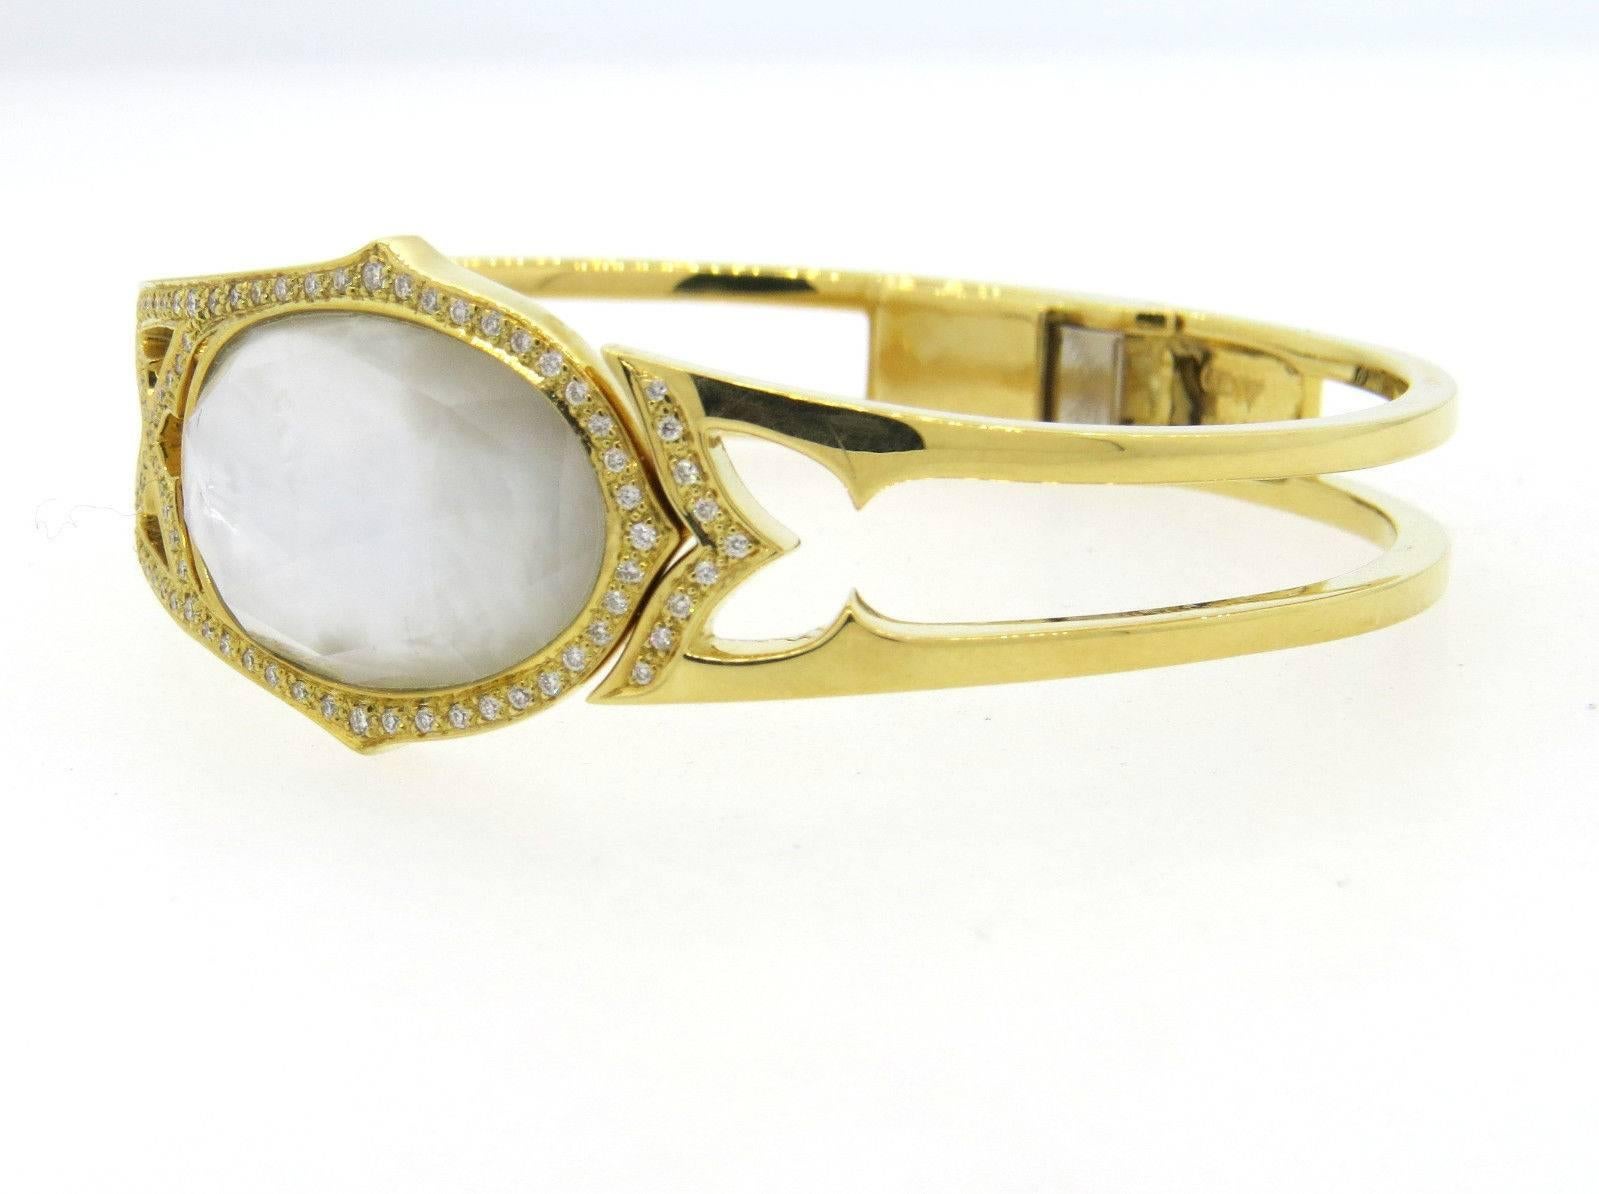 An 18k Yellow Gold adorned with crystal, backed with mother of pearl and 0.28ctw of G/VS diamonds.  Crafted by Stephen Webster, the bracelet will fit up to 7